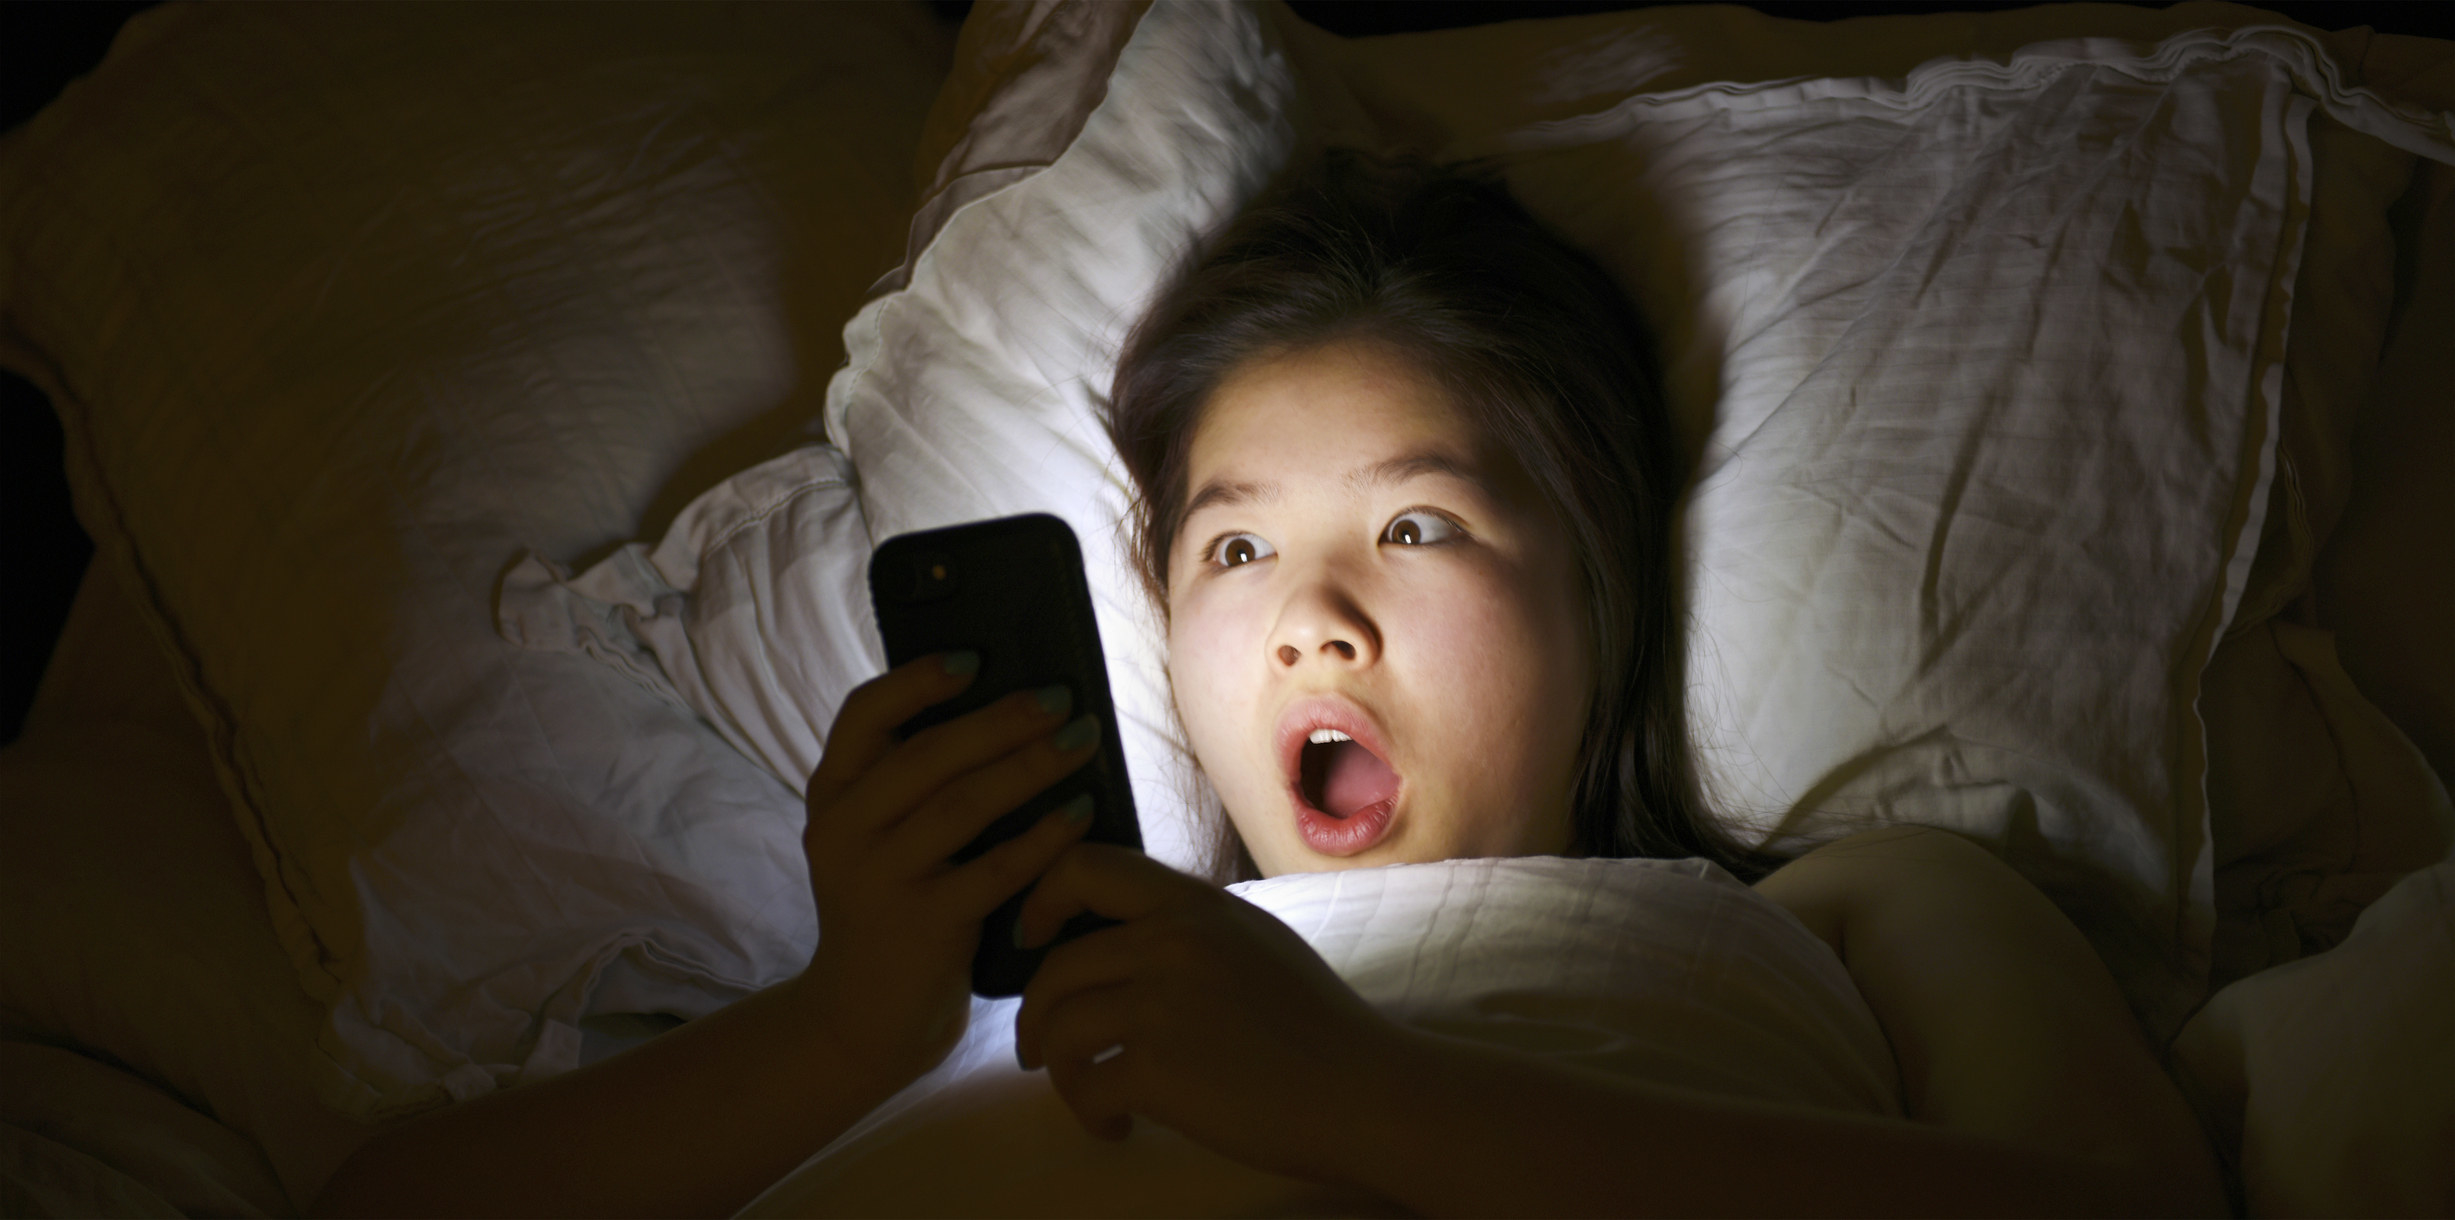 a person with a shocked expression looking at a phone in bed